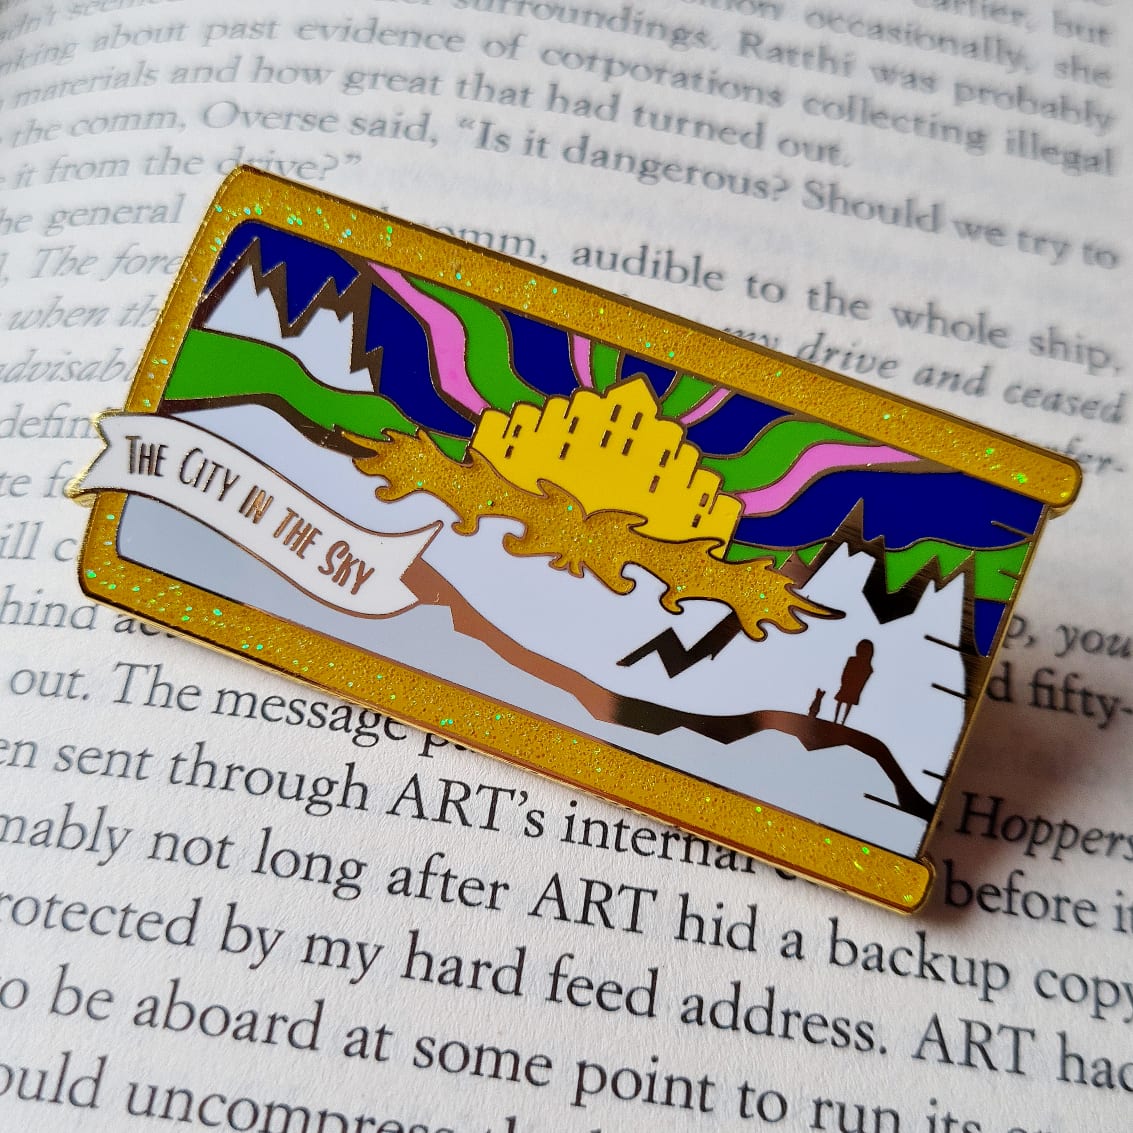 The City in the Sky build your own book stack enamel pin inspired by Philip Pullman's His Dark Materials series.